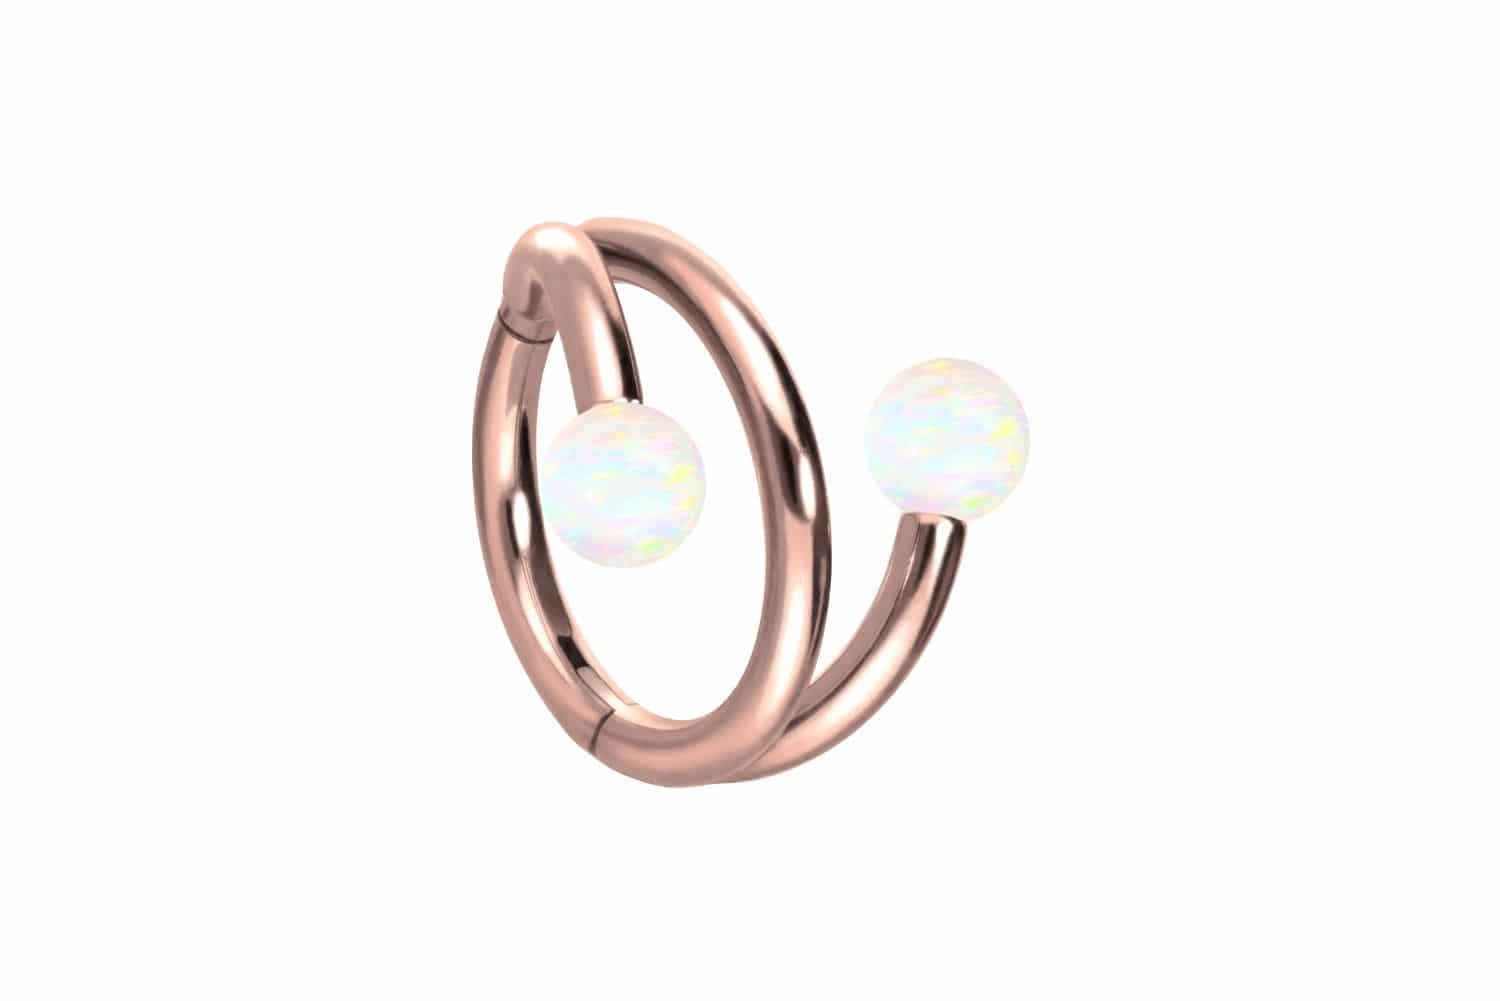 Titanium segment ring clicker with internal thread 3 RINGS + 2 SYNTHETIC OPALS